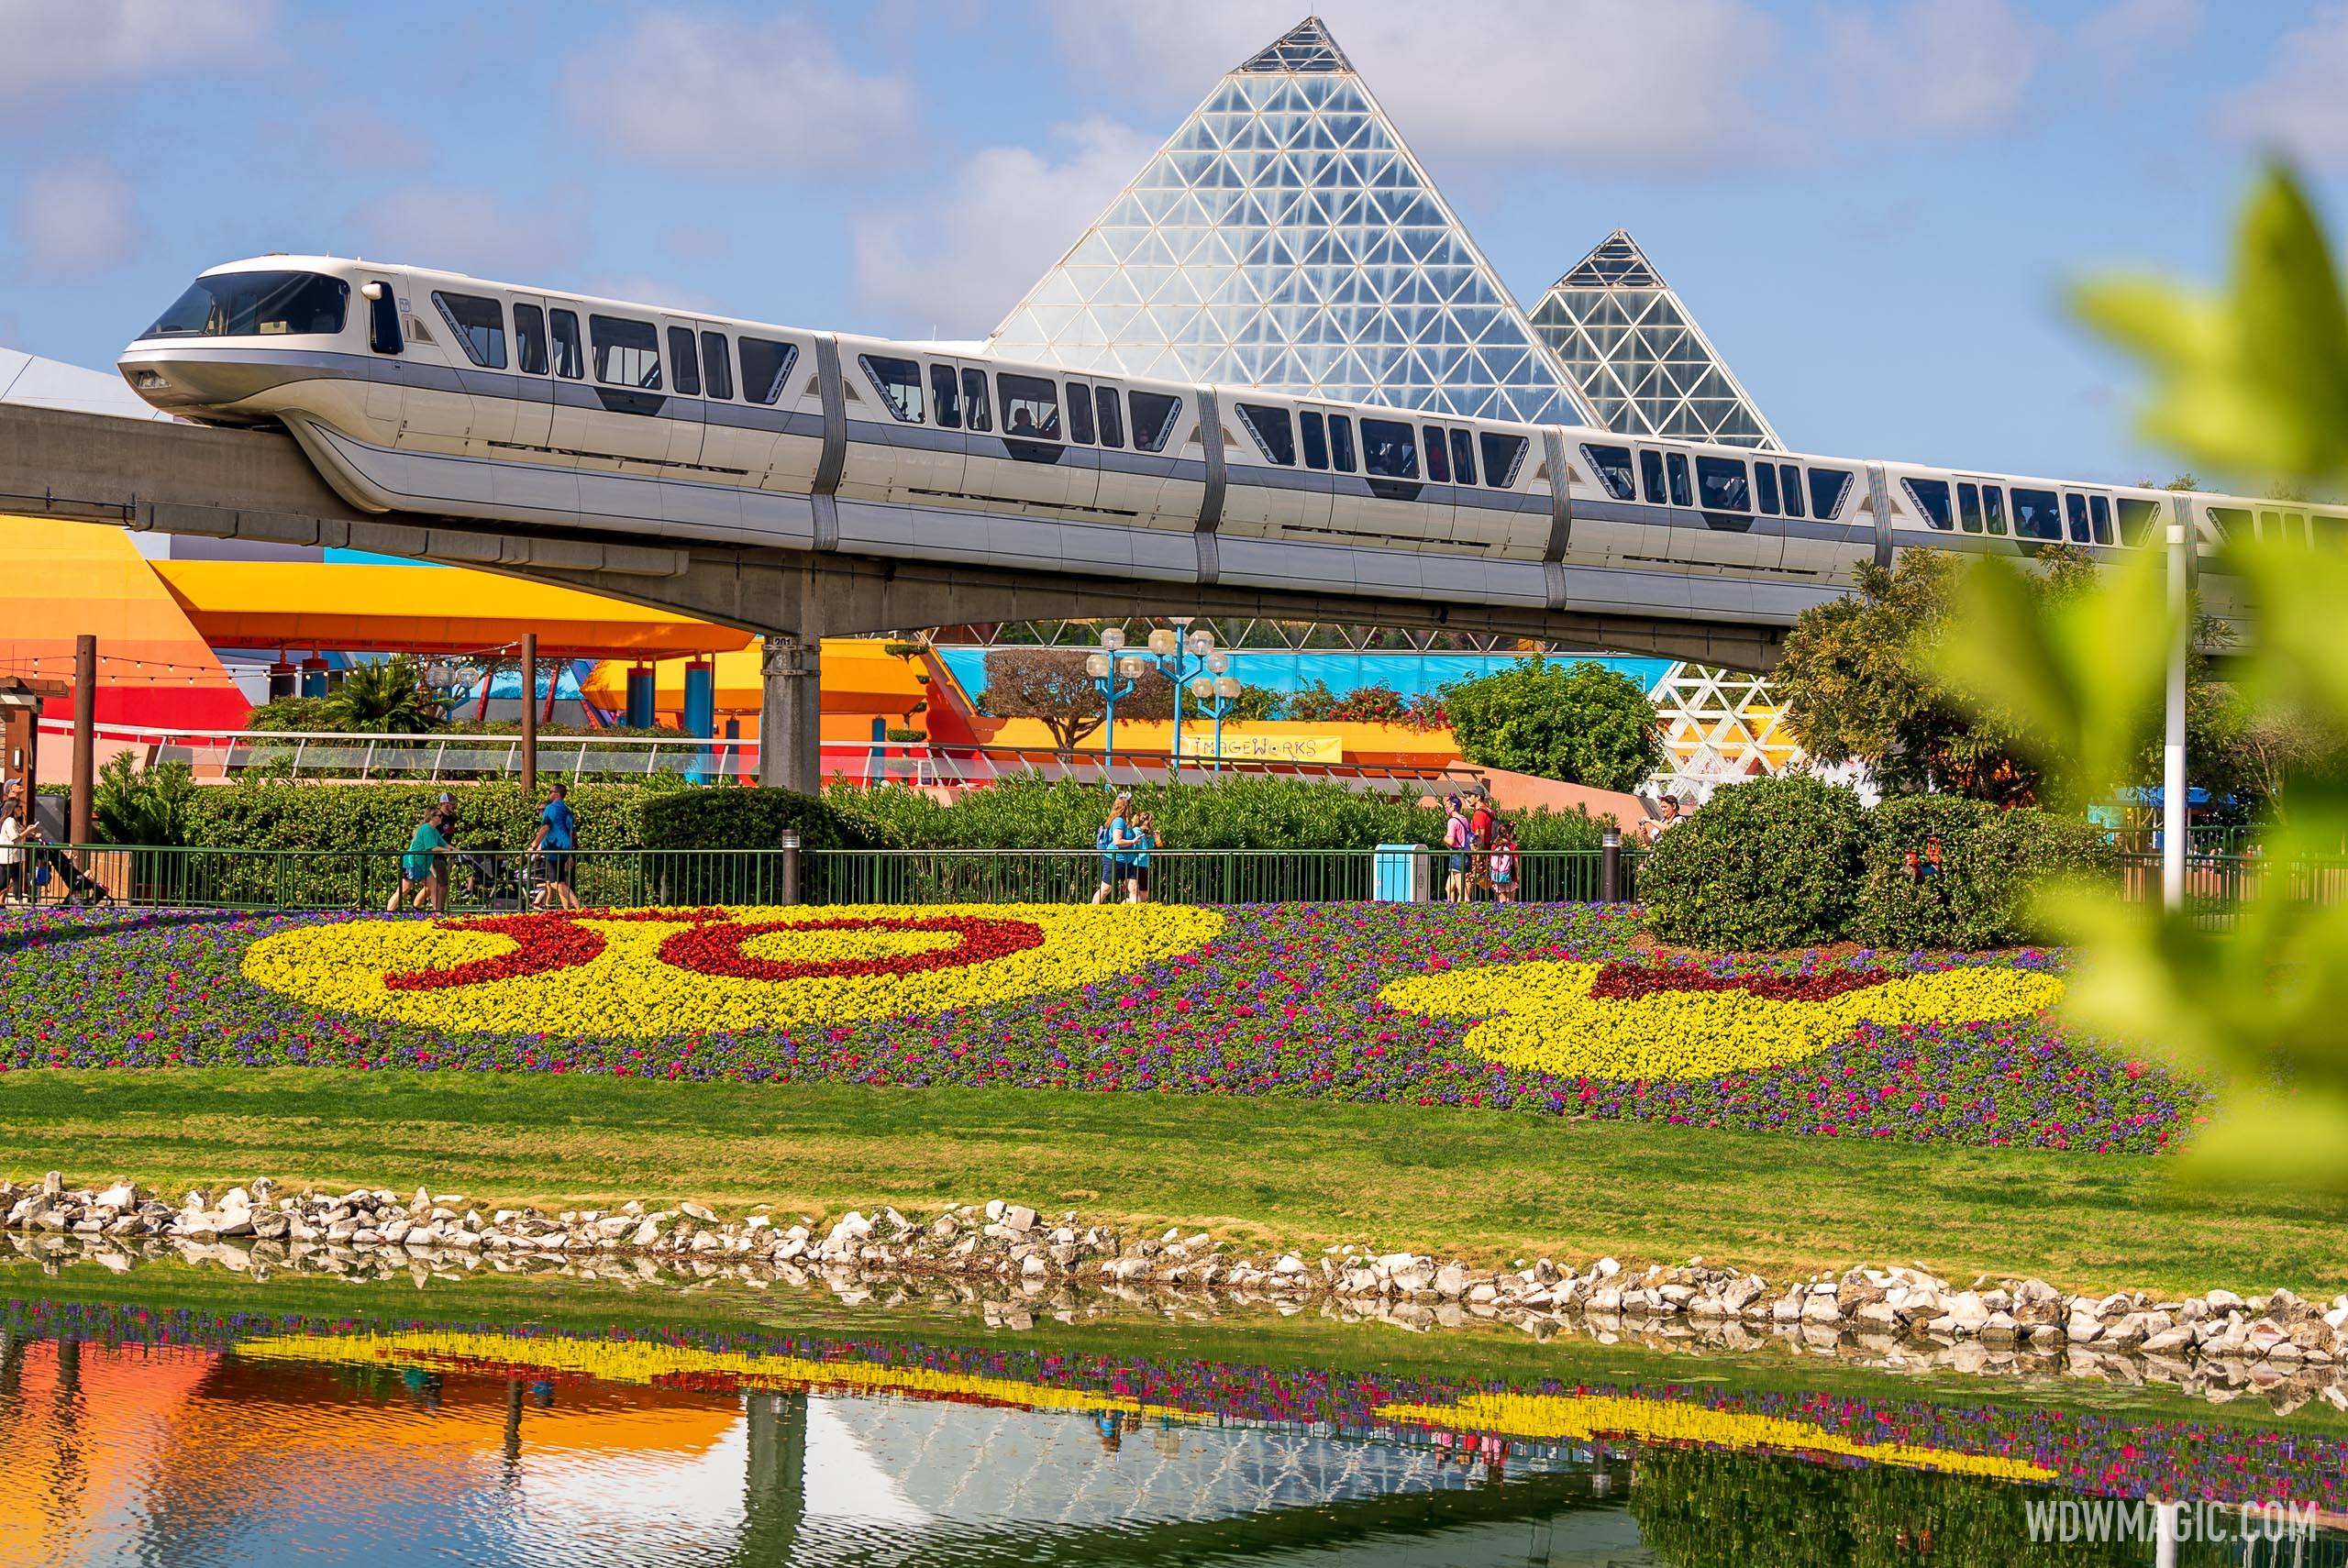 Flower Beds at the 2022 EPCOT International Flower and Garden Festival